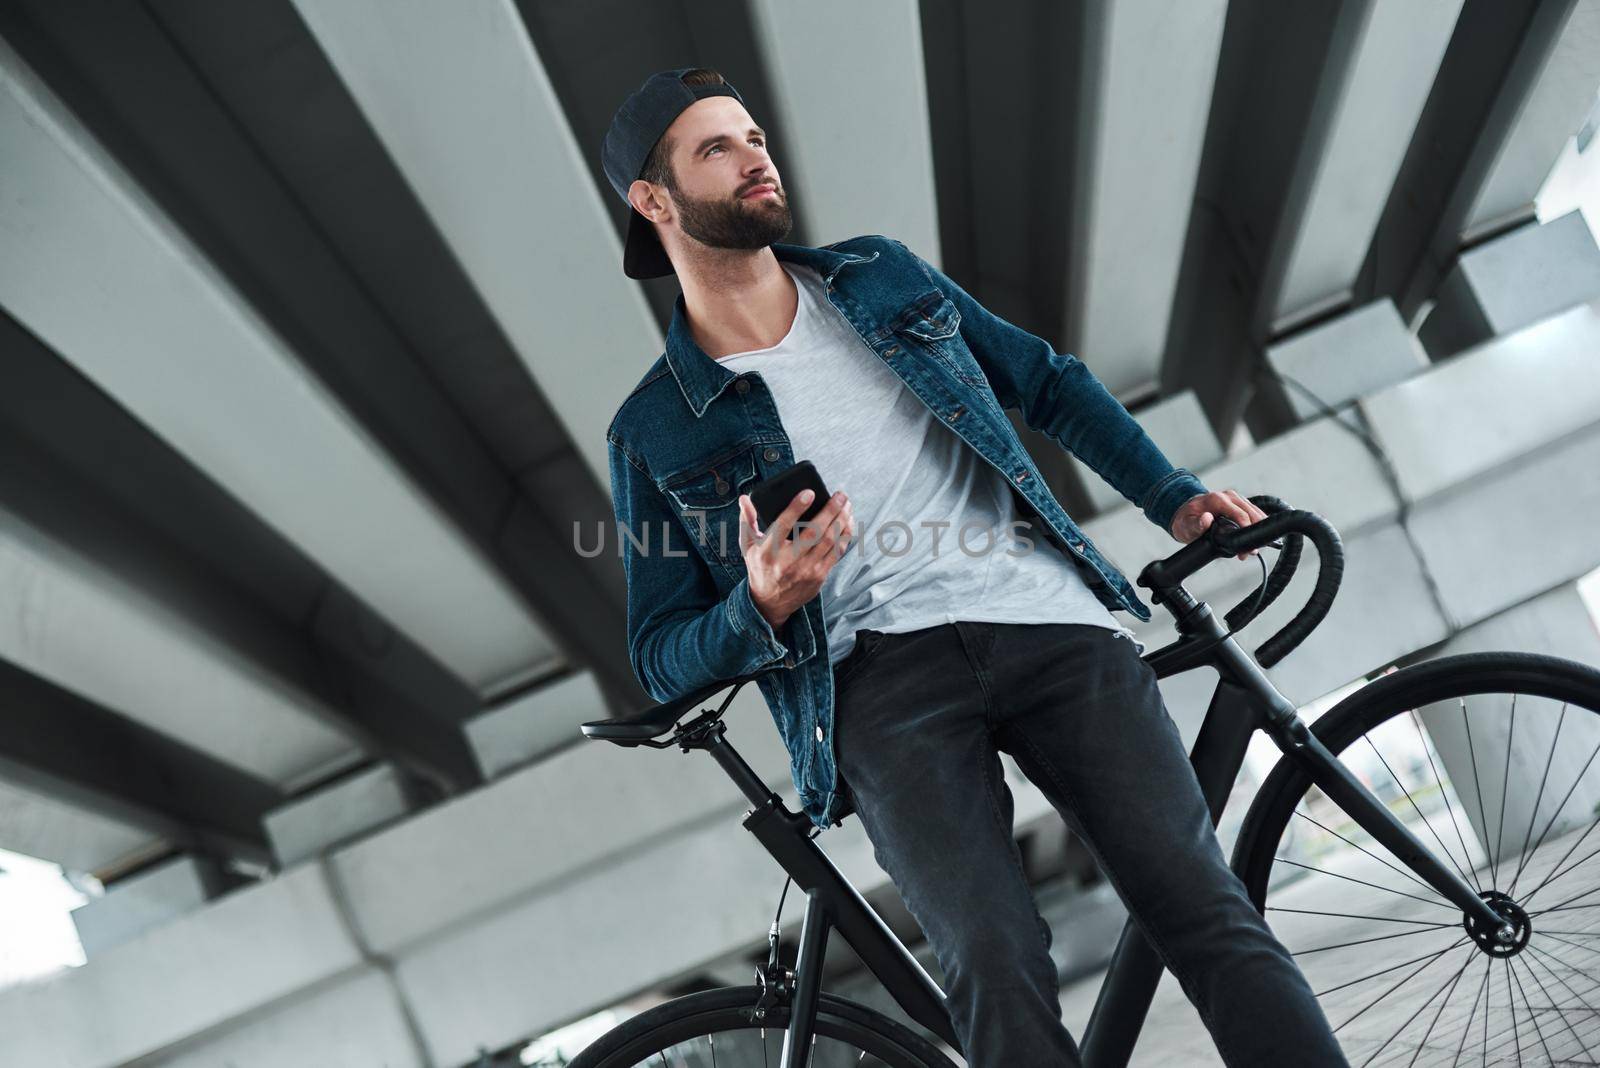 Outdoors leisure. Young stylish man sitting on bycicle on city street holding smartphone looking aside smiling joyful by friendsstock